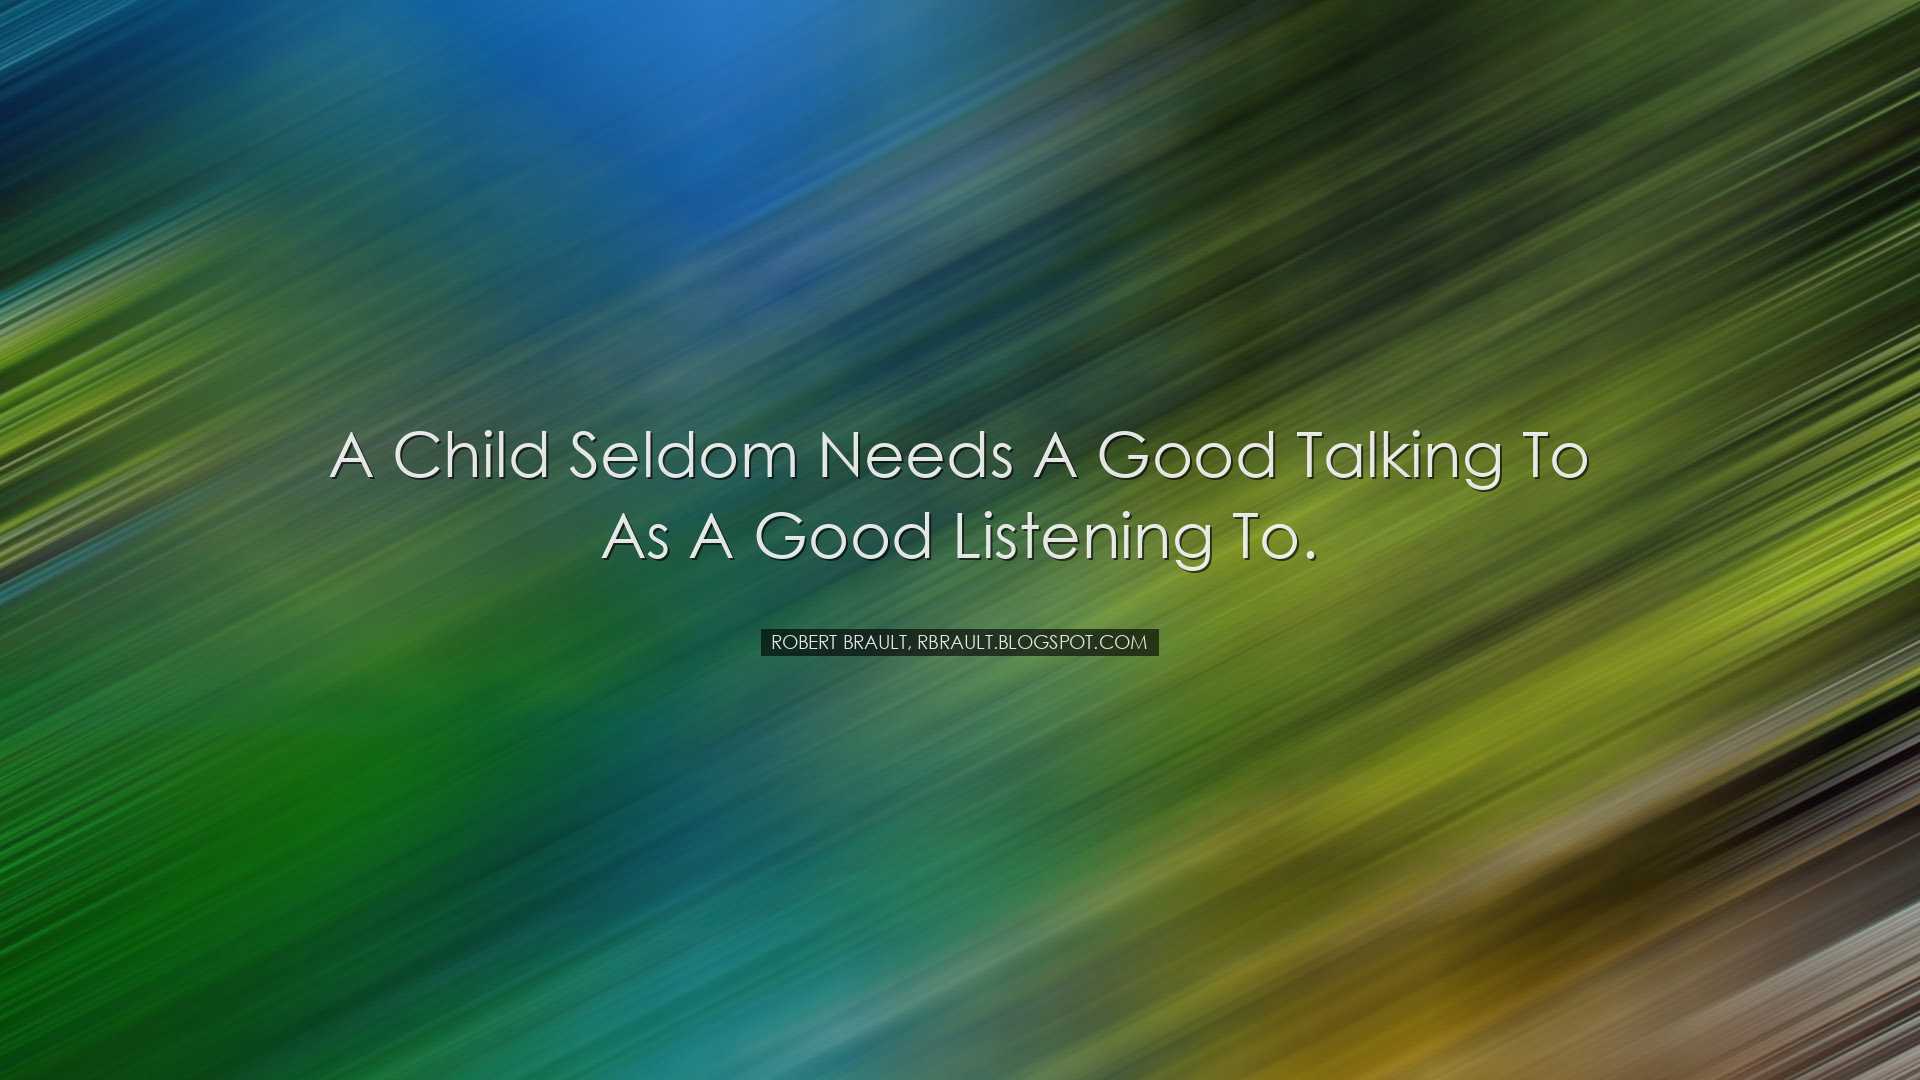 A child seldom needs a good talking to as a good listening to. - R